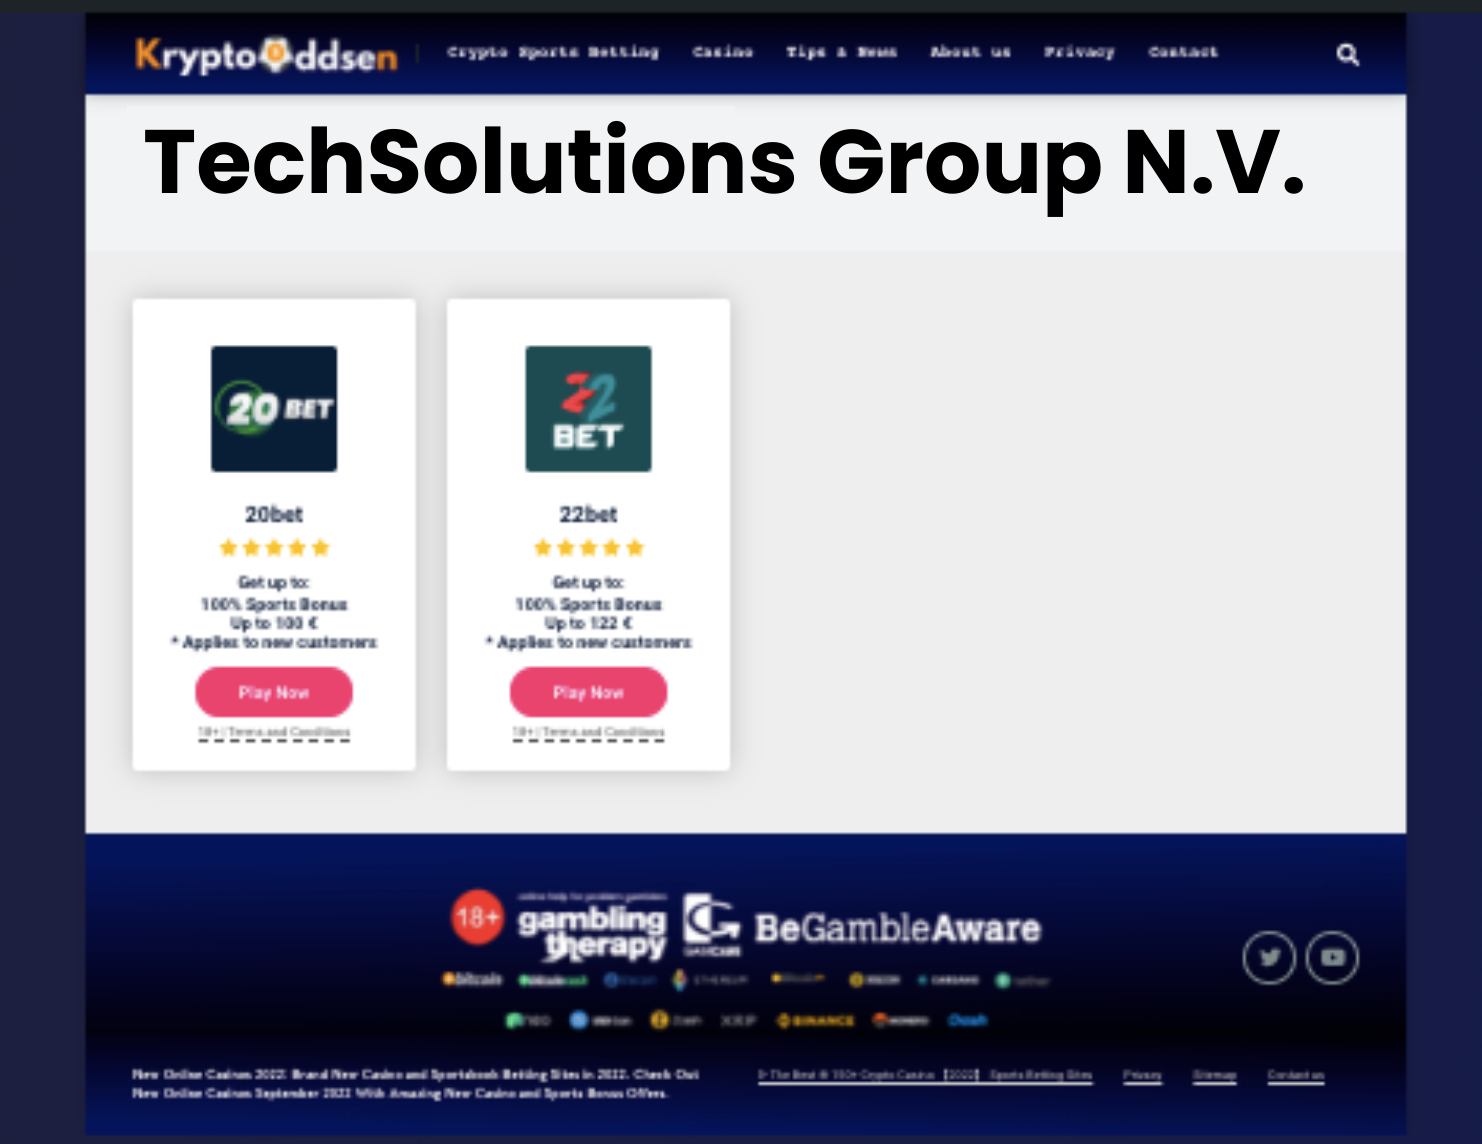 TechSolutions Group N.V. Casino Owned Operated